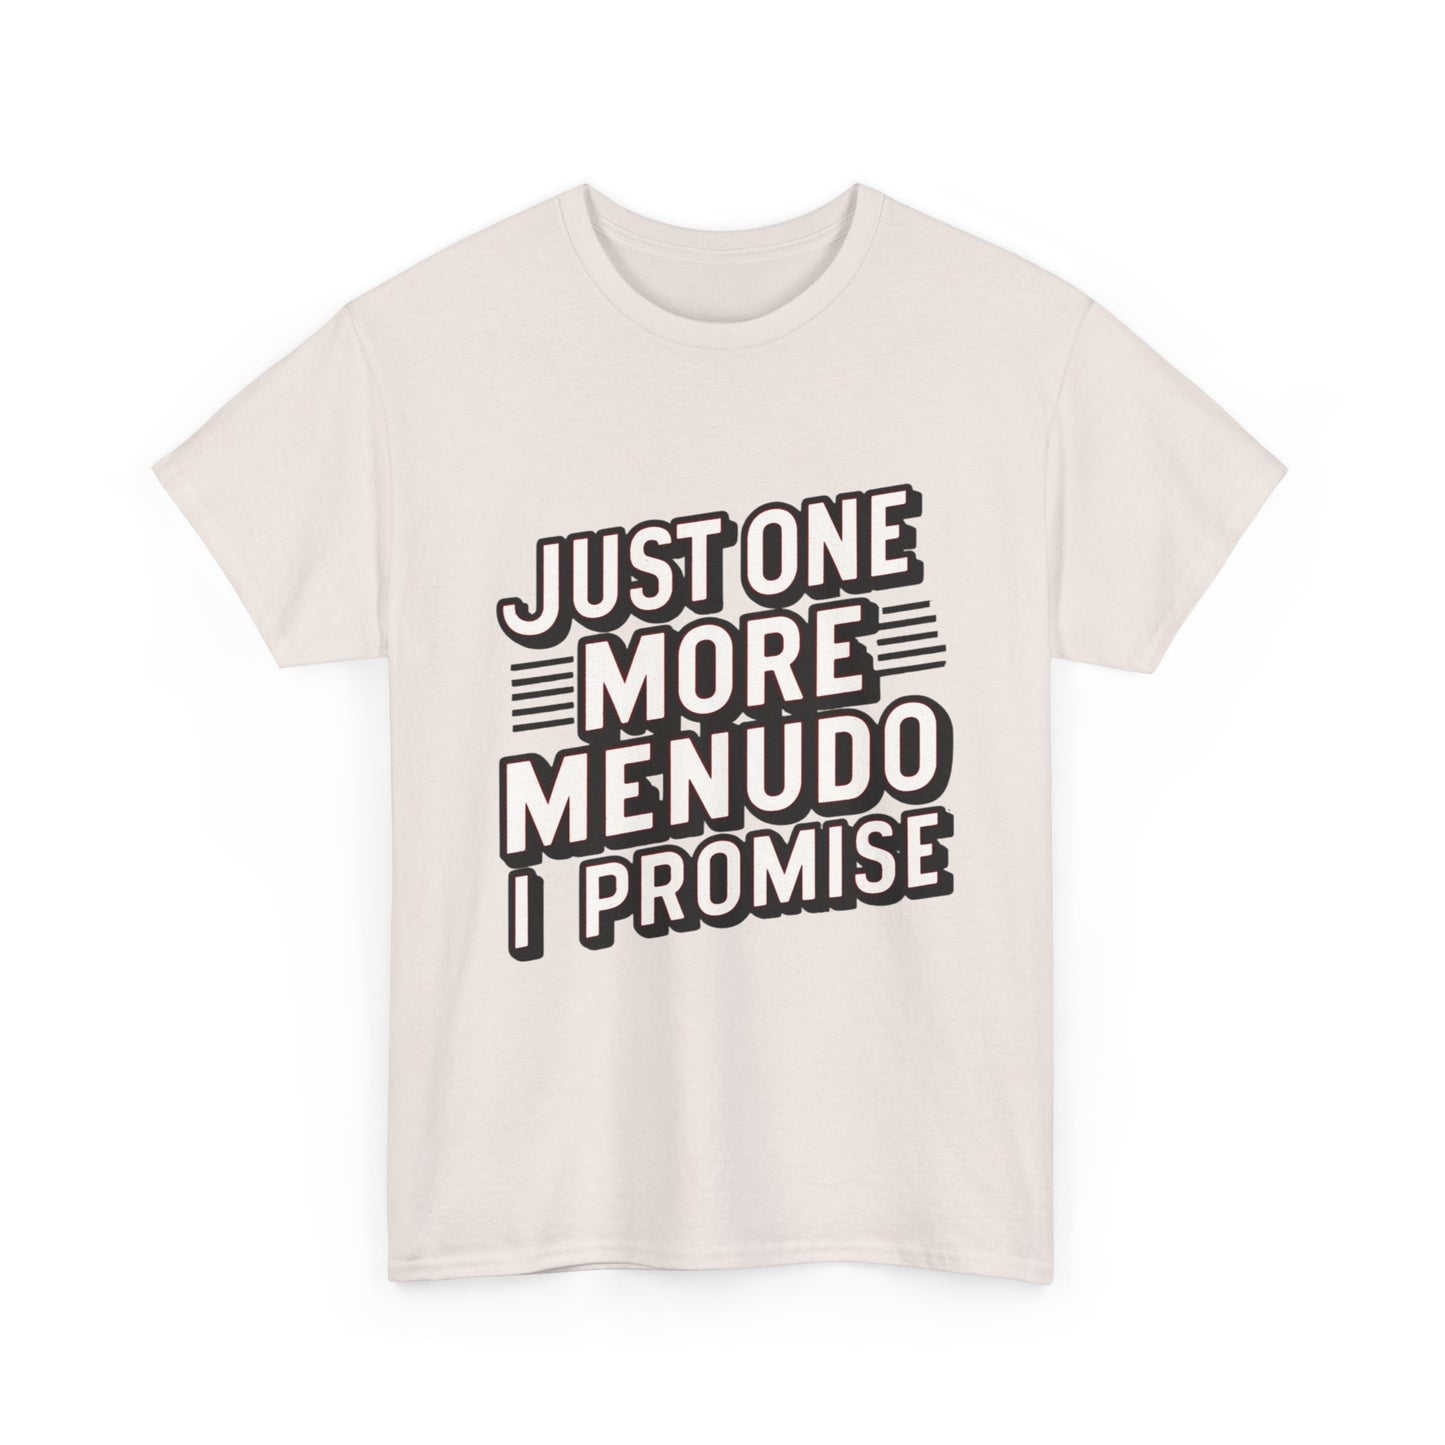 Just One More Menudo I Promise Mexican Food Graphic Unisex Heavy Cotton Tee Cotton Funny Humorous Graphic Soft Premium Unisex Men Women Ice Gray T-shirt Birthday Gift-48